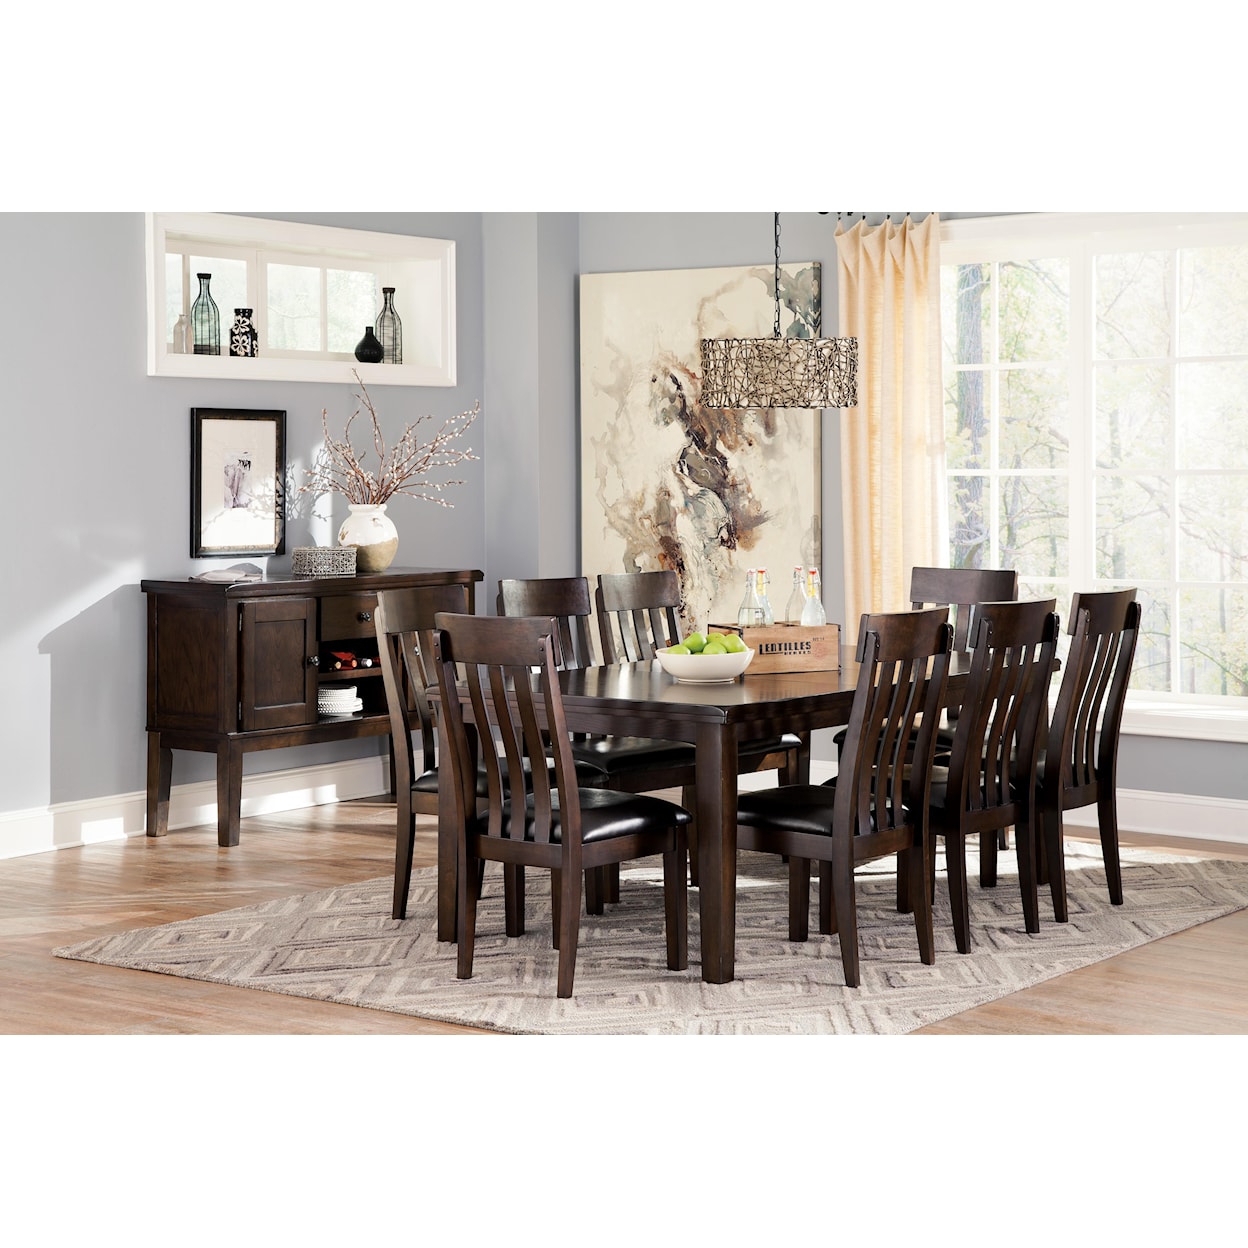 Ashley Furniture Signature Design Haddigan 9-Piece Dining Room Table & Side Chair Set